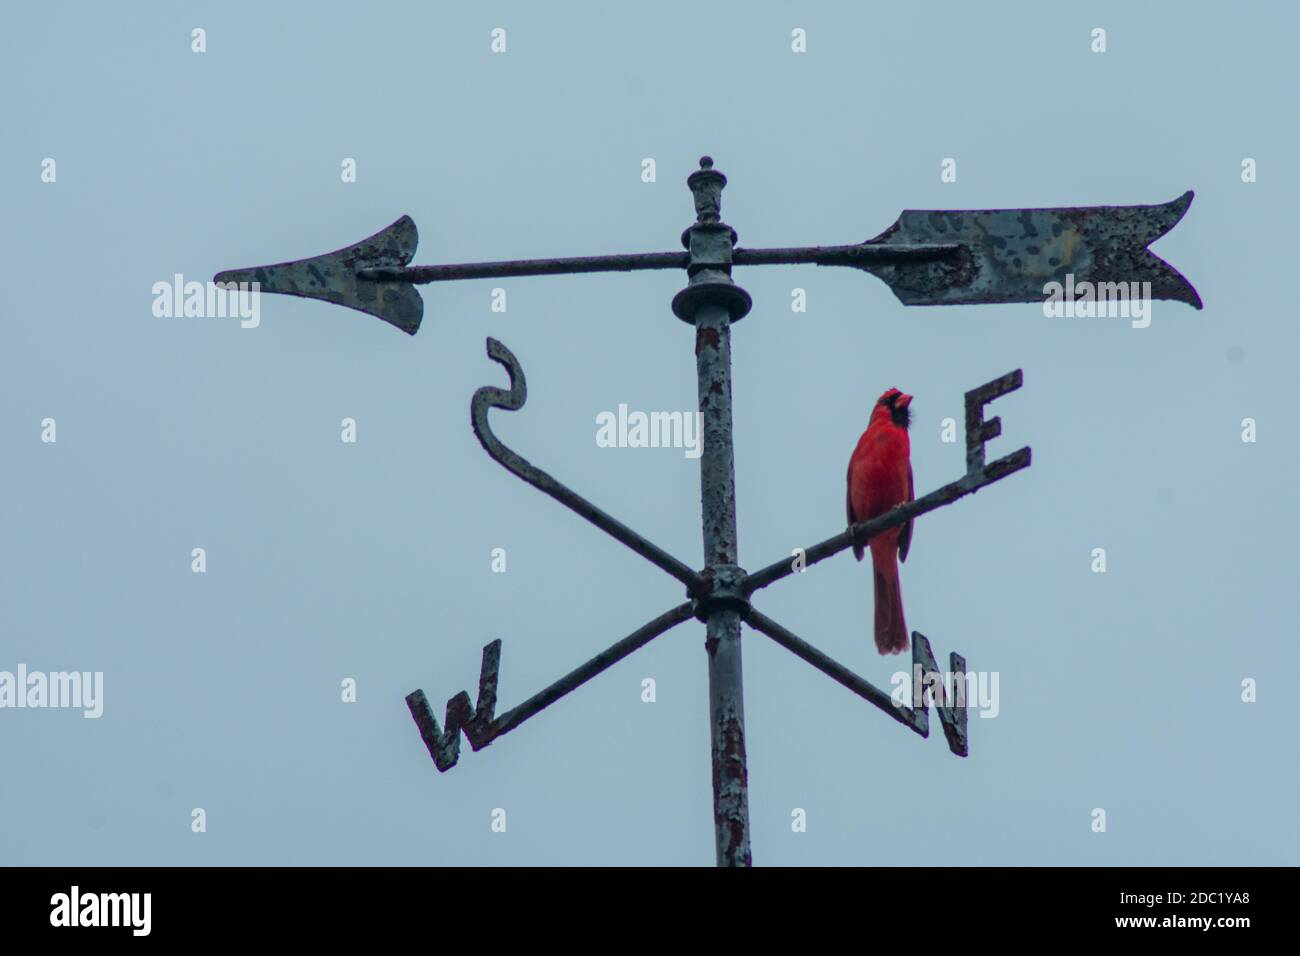 A Red Cardinal on a Directional Weathervane on a Blue Sky Stock Photo